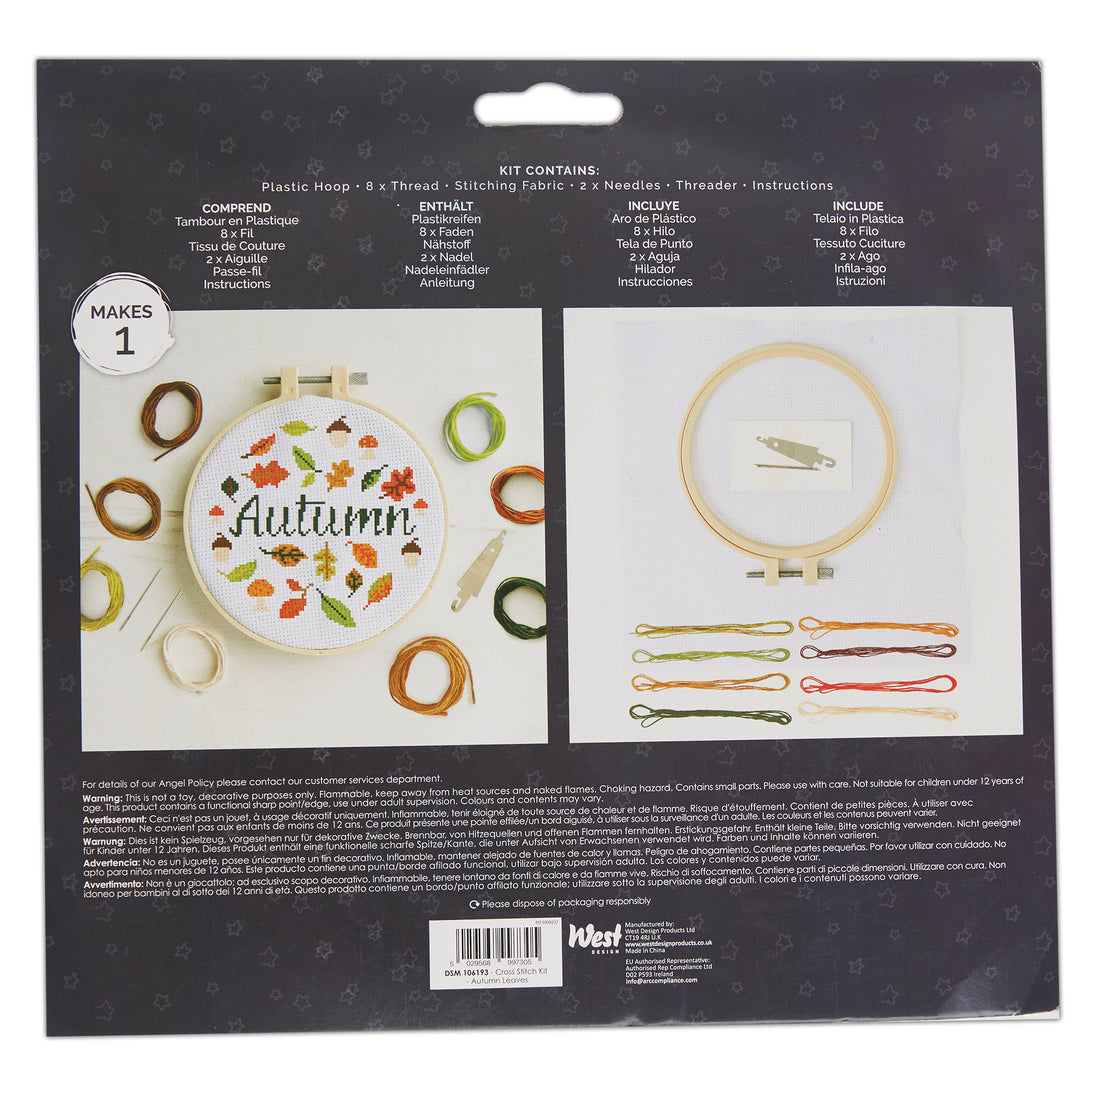 3 Embroidery Kit with 3 Plastic Hoops and Instructions, Cross